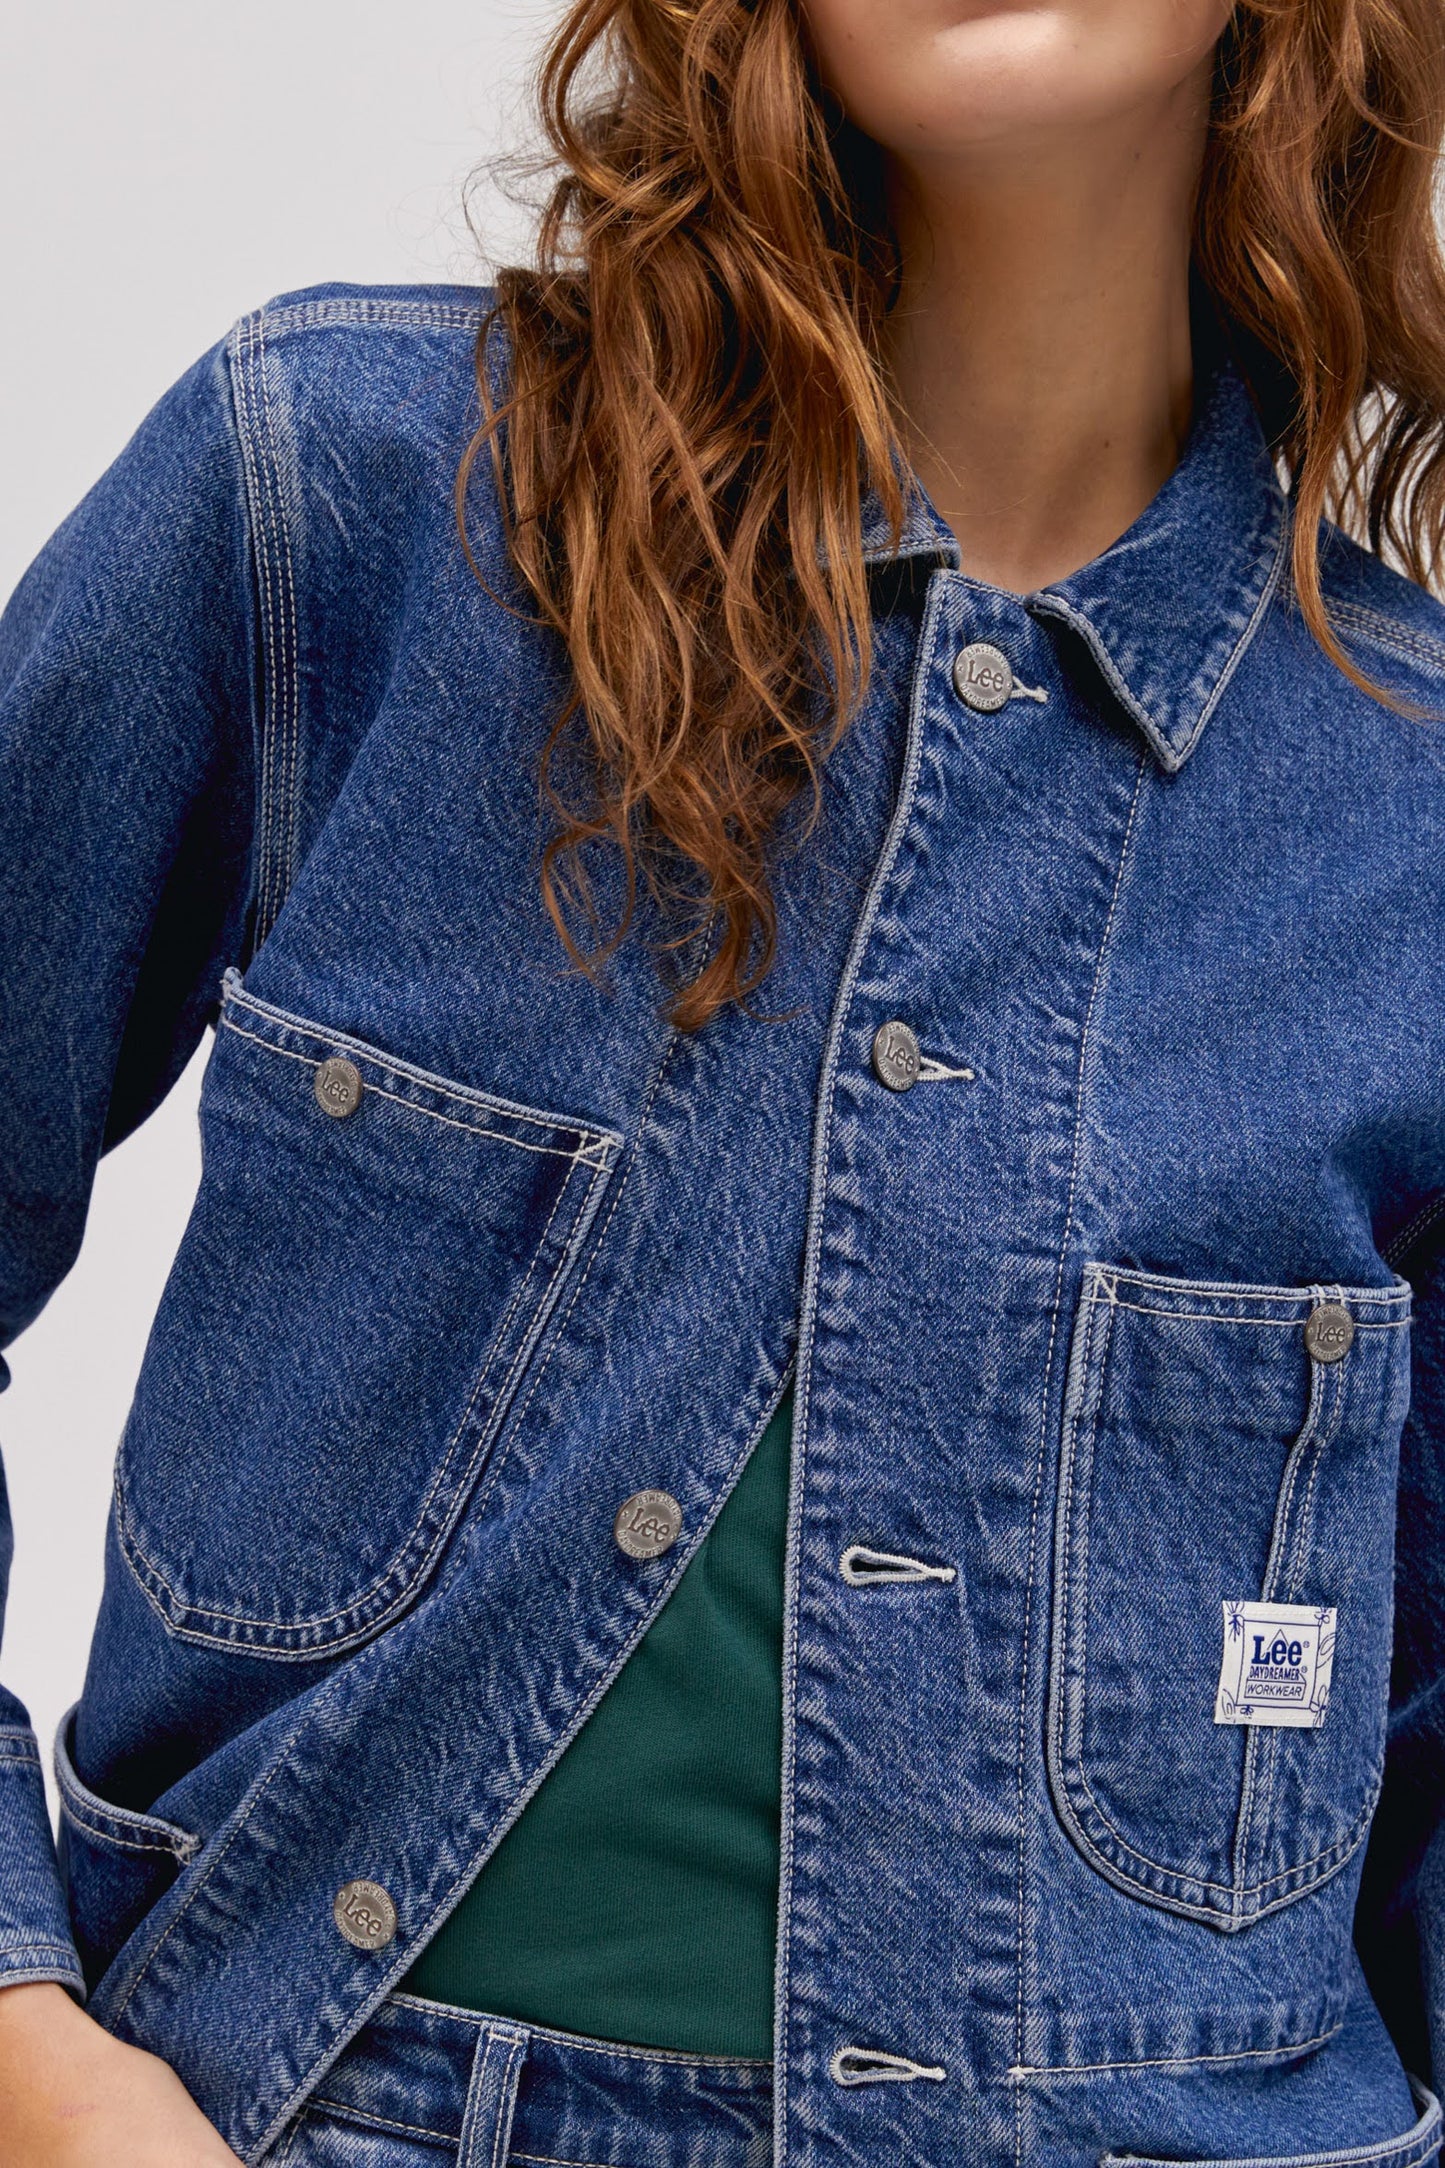 A curly-haired model featuring a blue chore jacket designed with  triple-stitched hems and roomy pockets on an oversized fit.